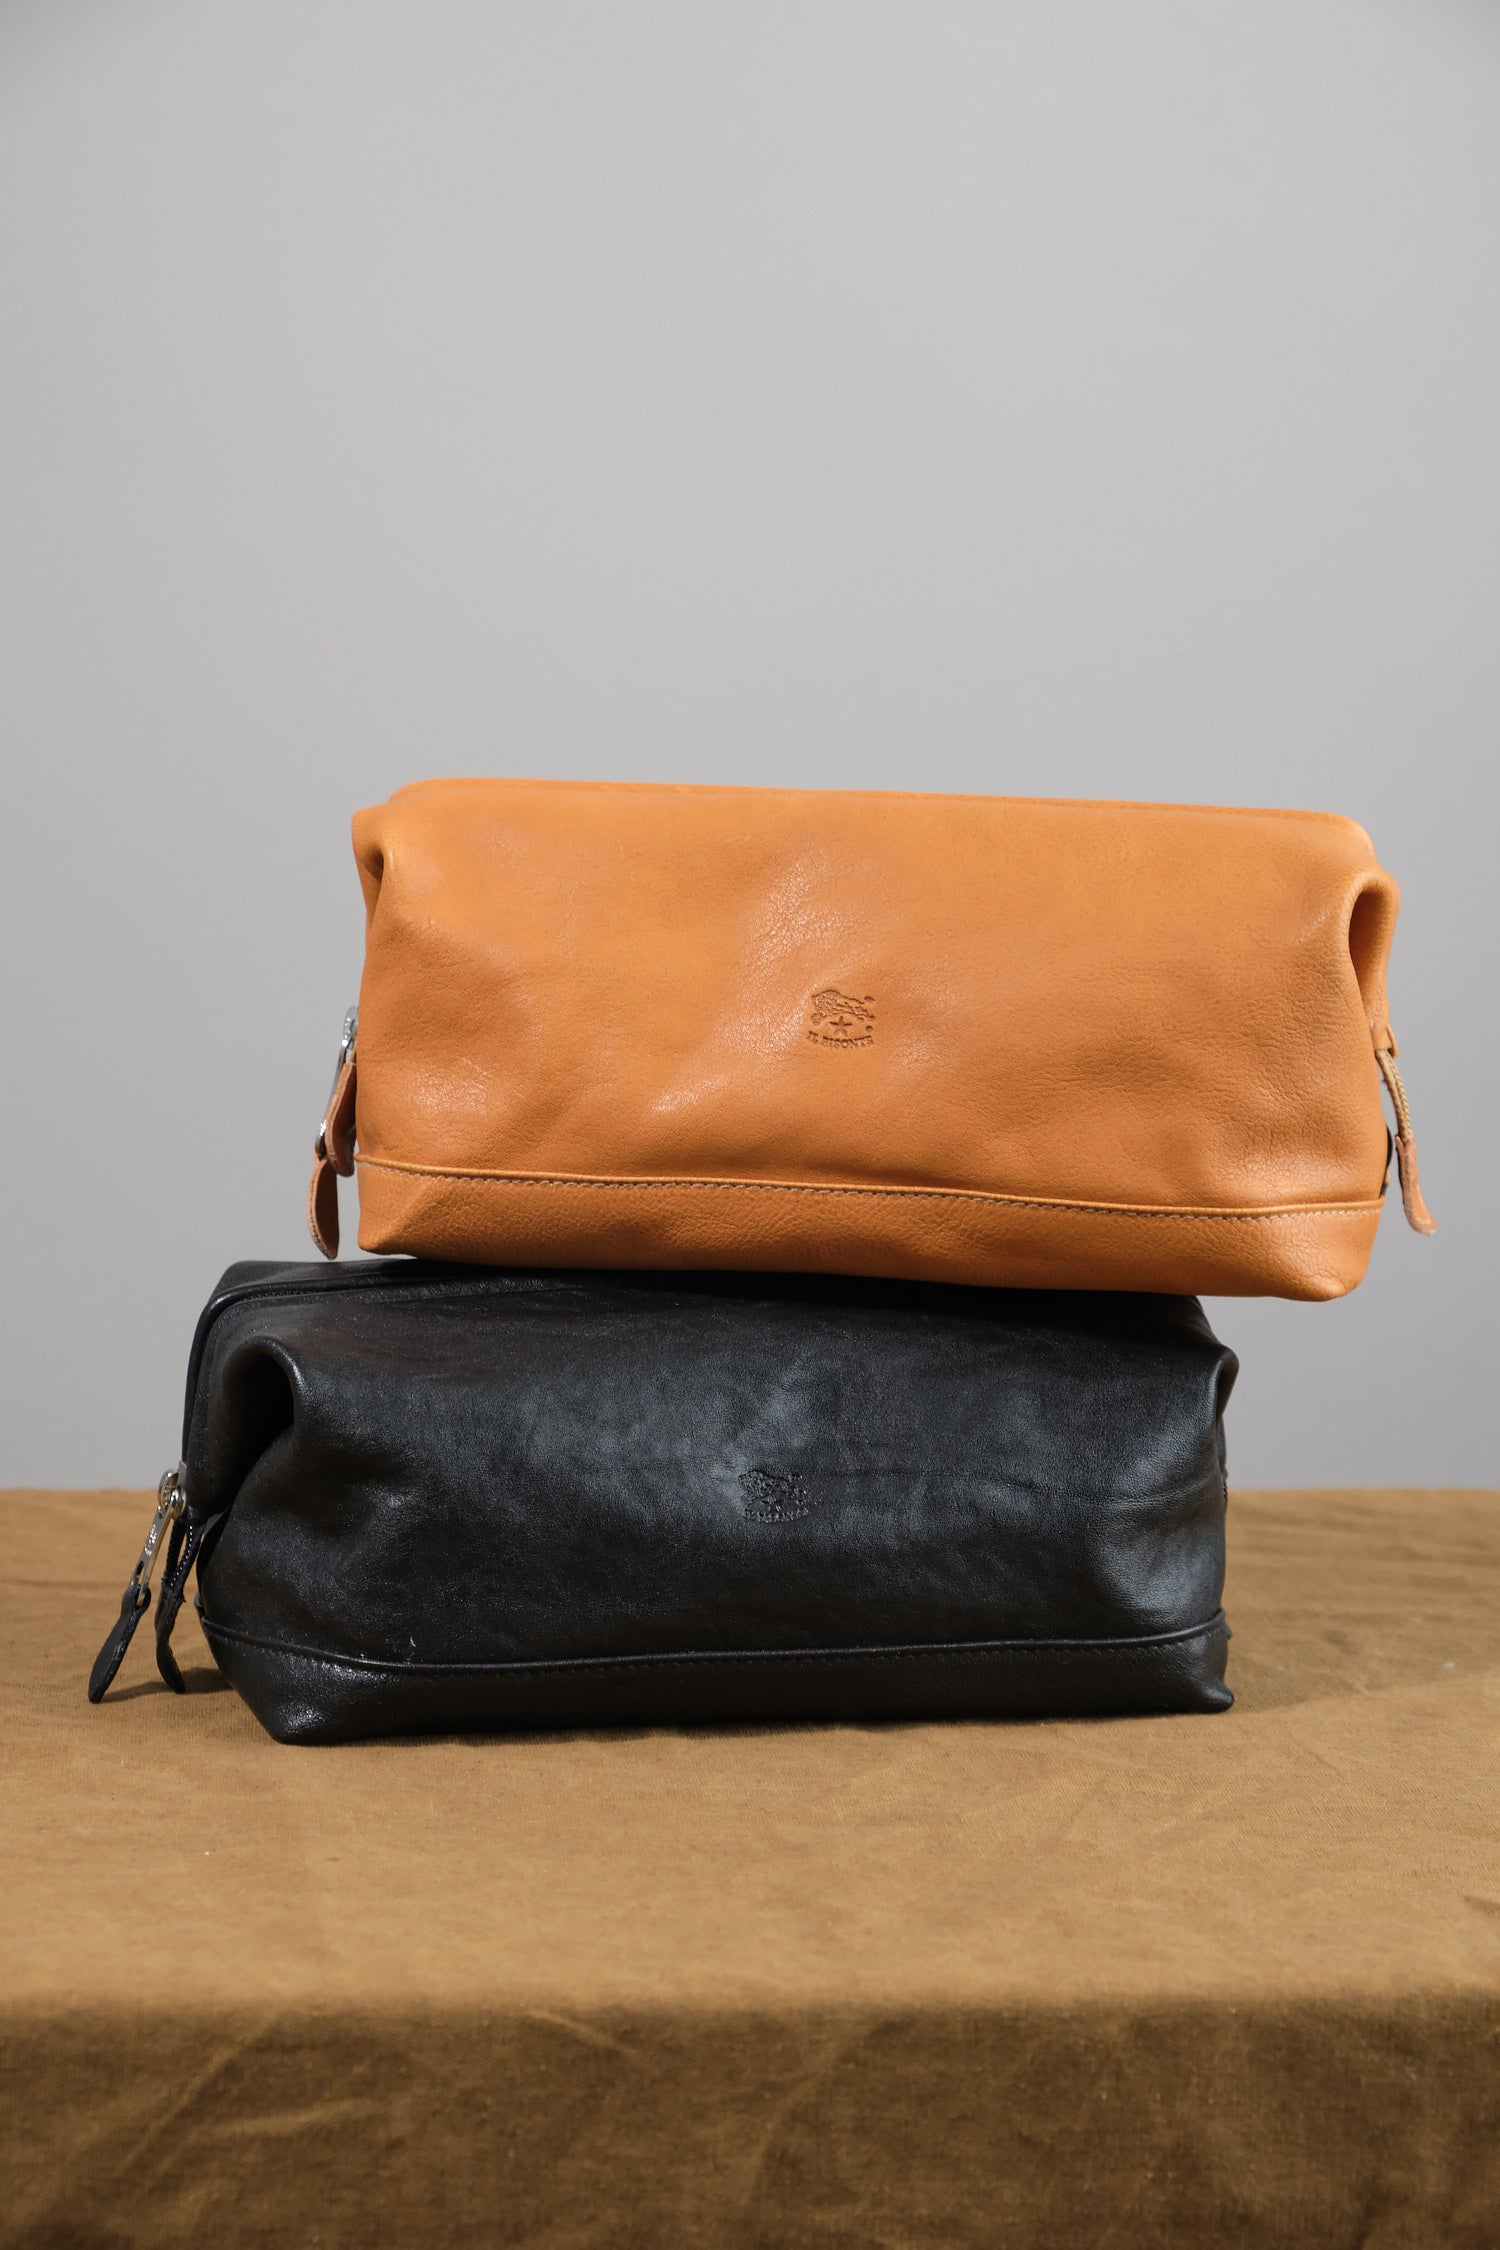 Leather DOPP Kit Cowhide Leather Toiletry Bag, Cowhide Travel Bag